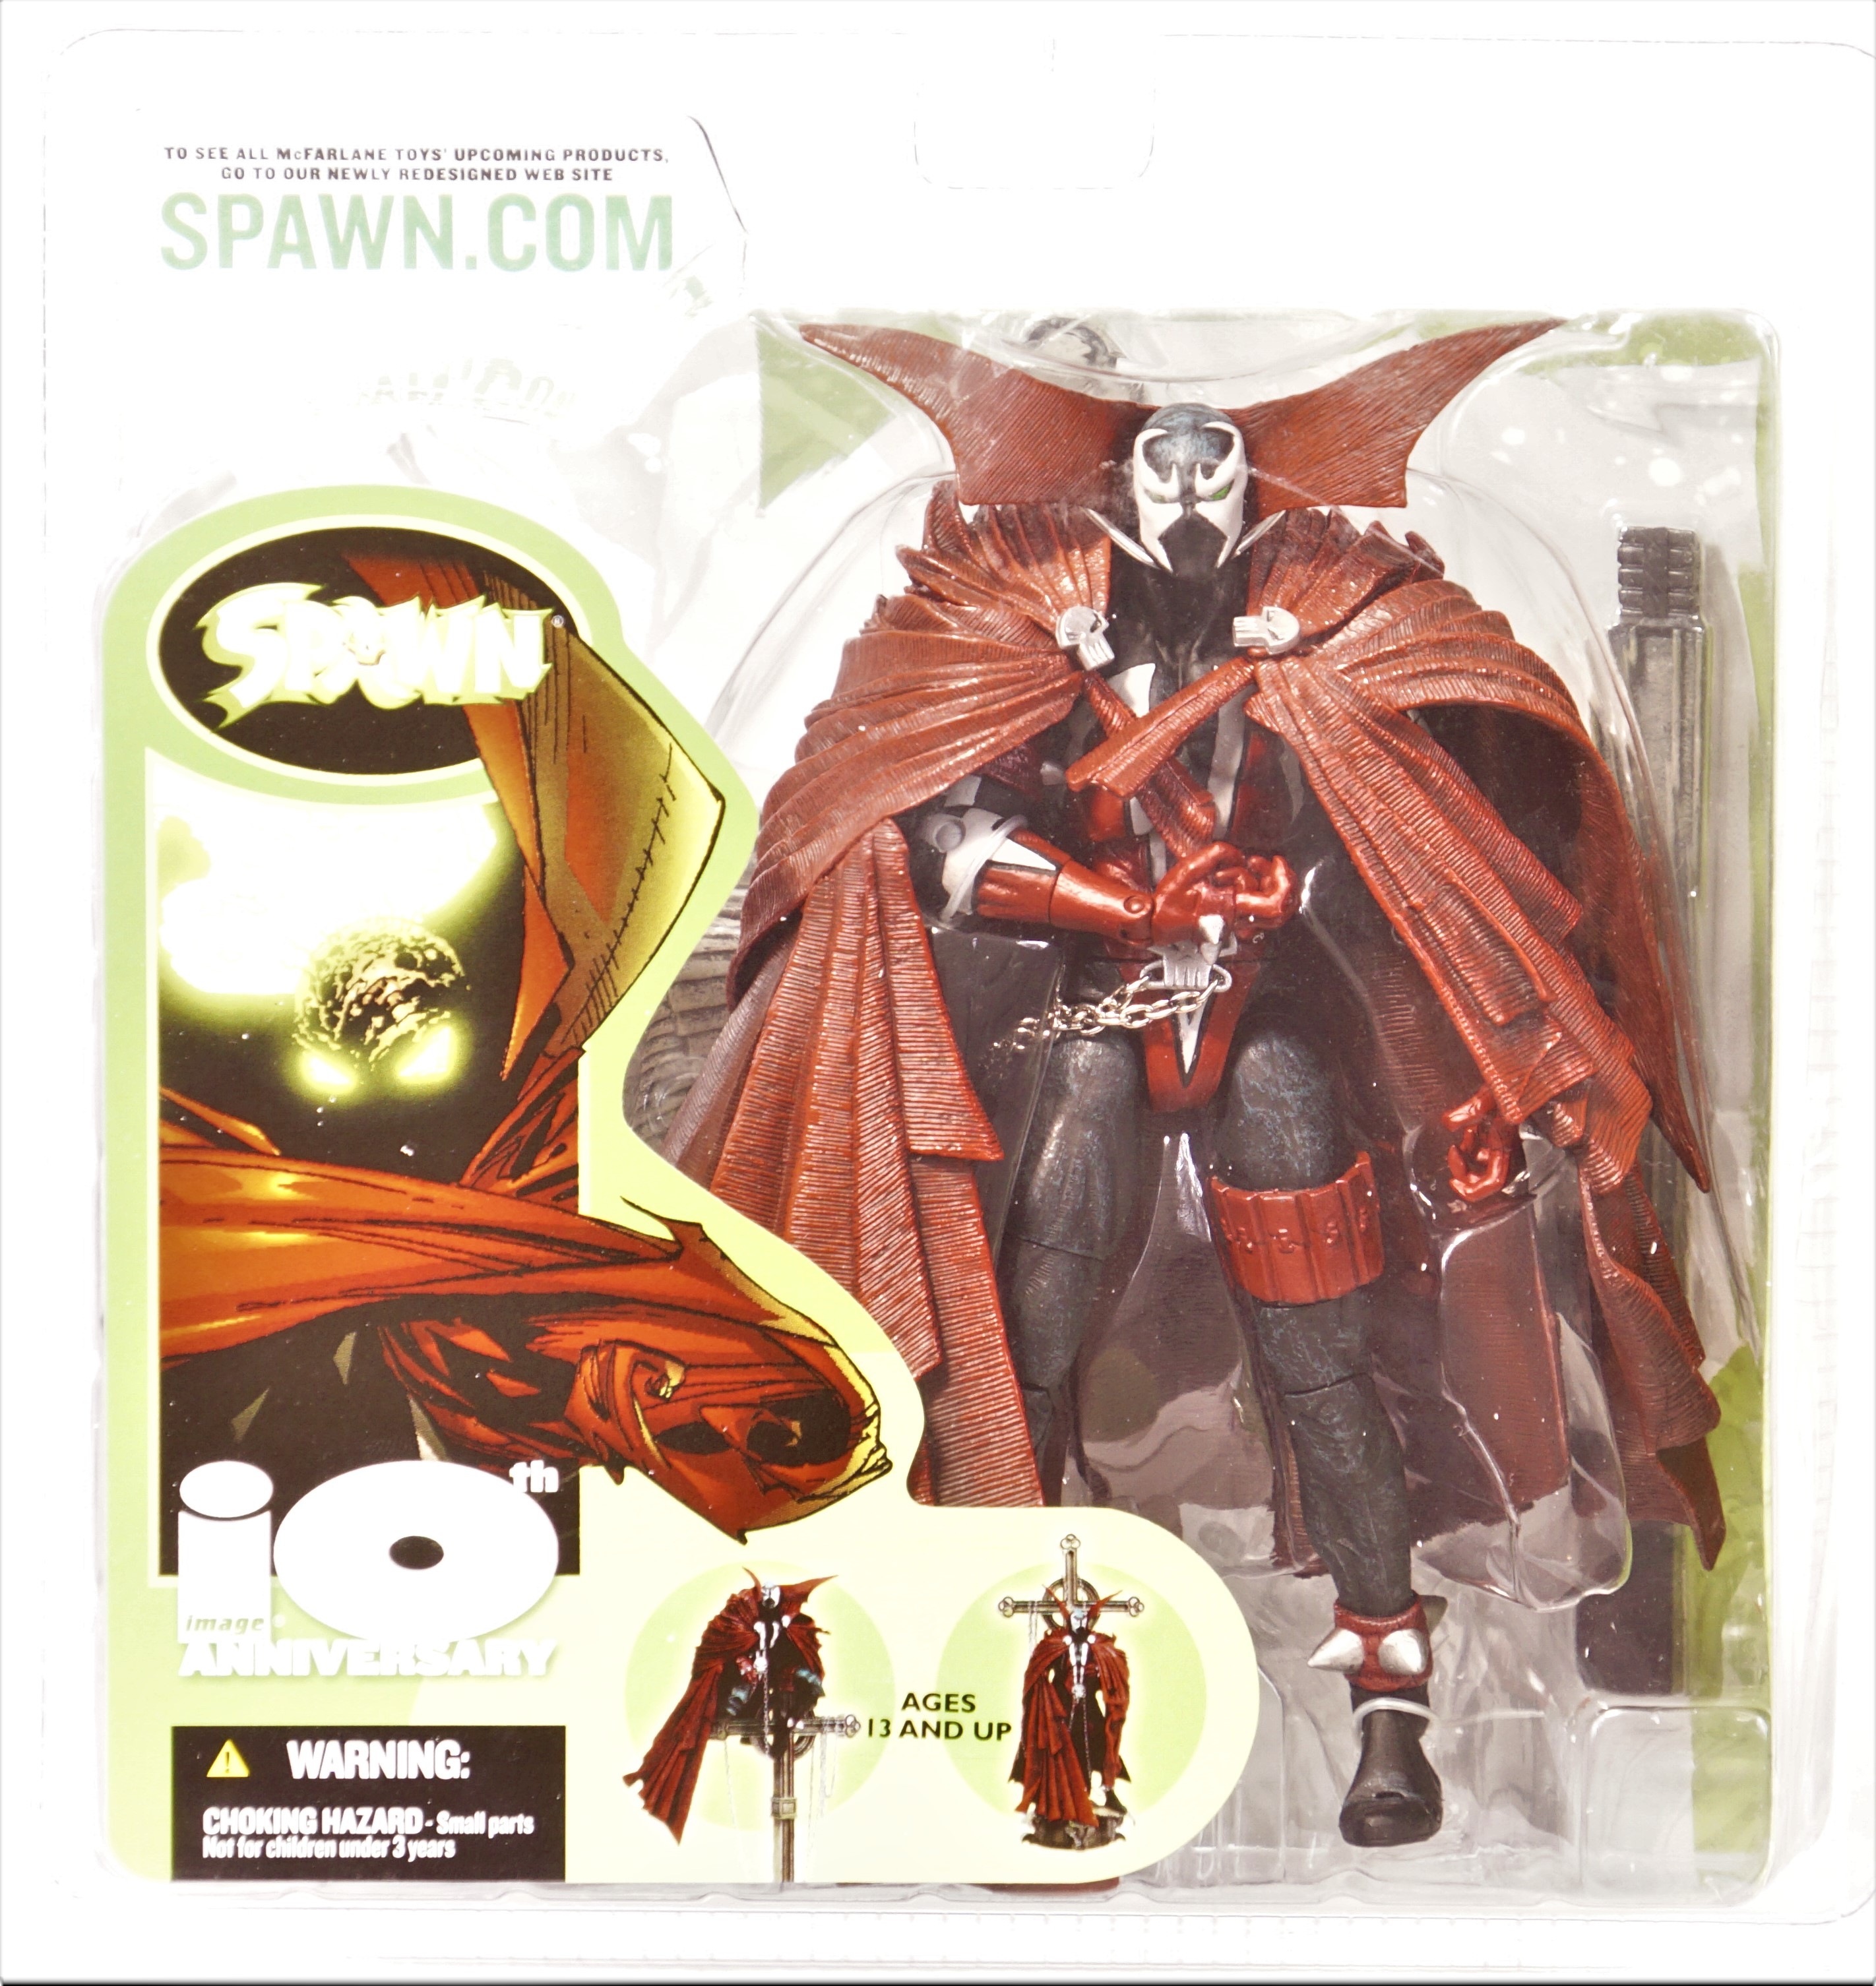 2002 McFarlane Toys Spawn Carded Action Figure - Spawn 10th Anniversary